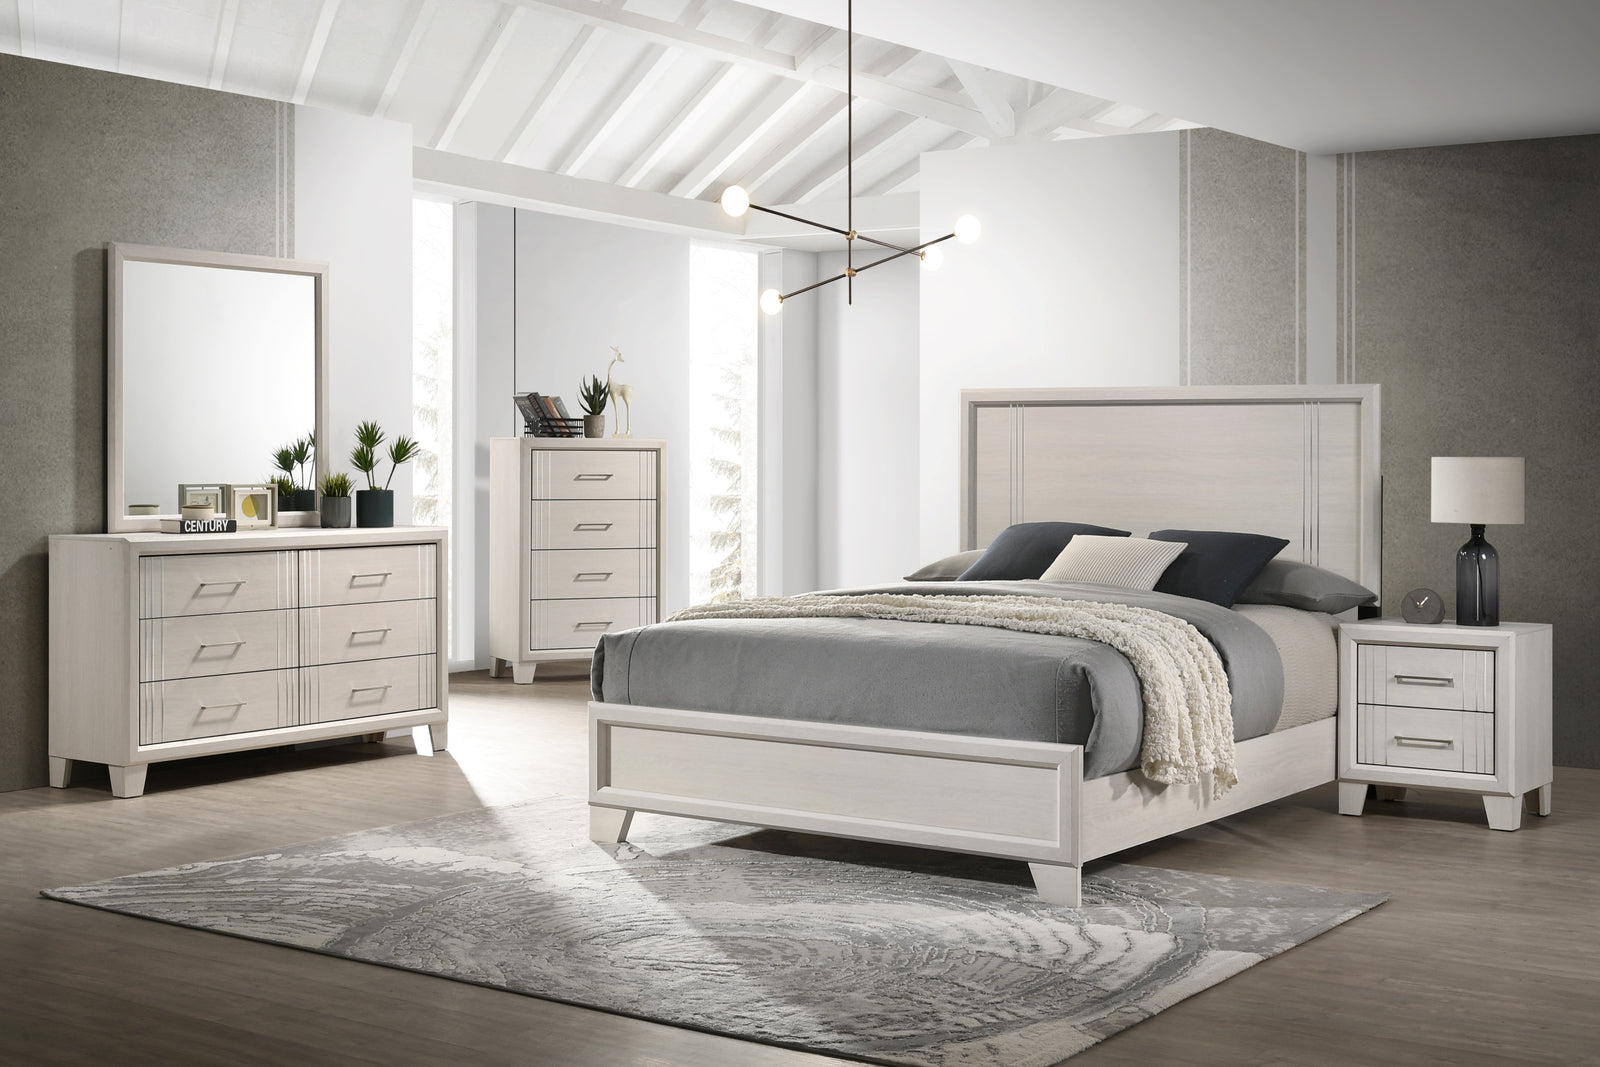 Charlie Cream Modern Contemporary Solid Wood And Veneers King Bed